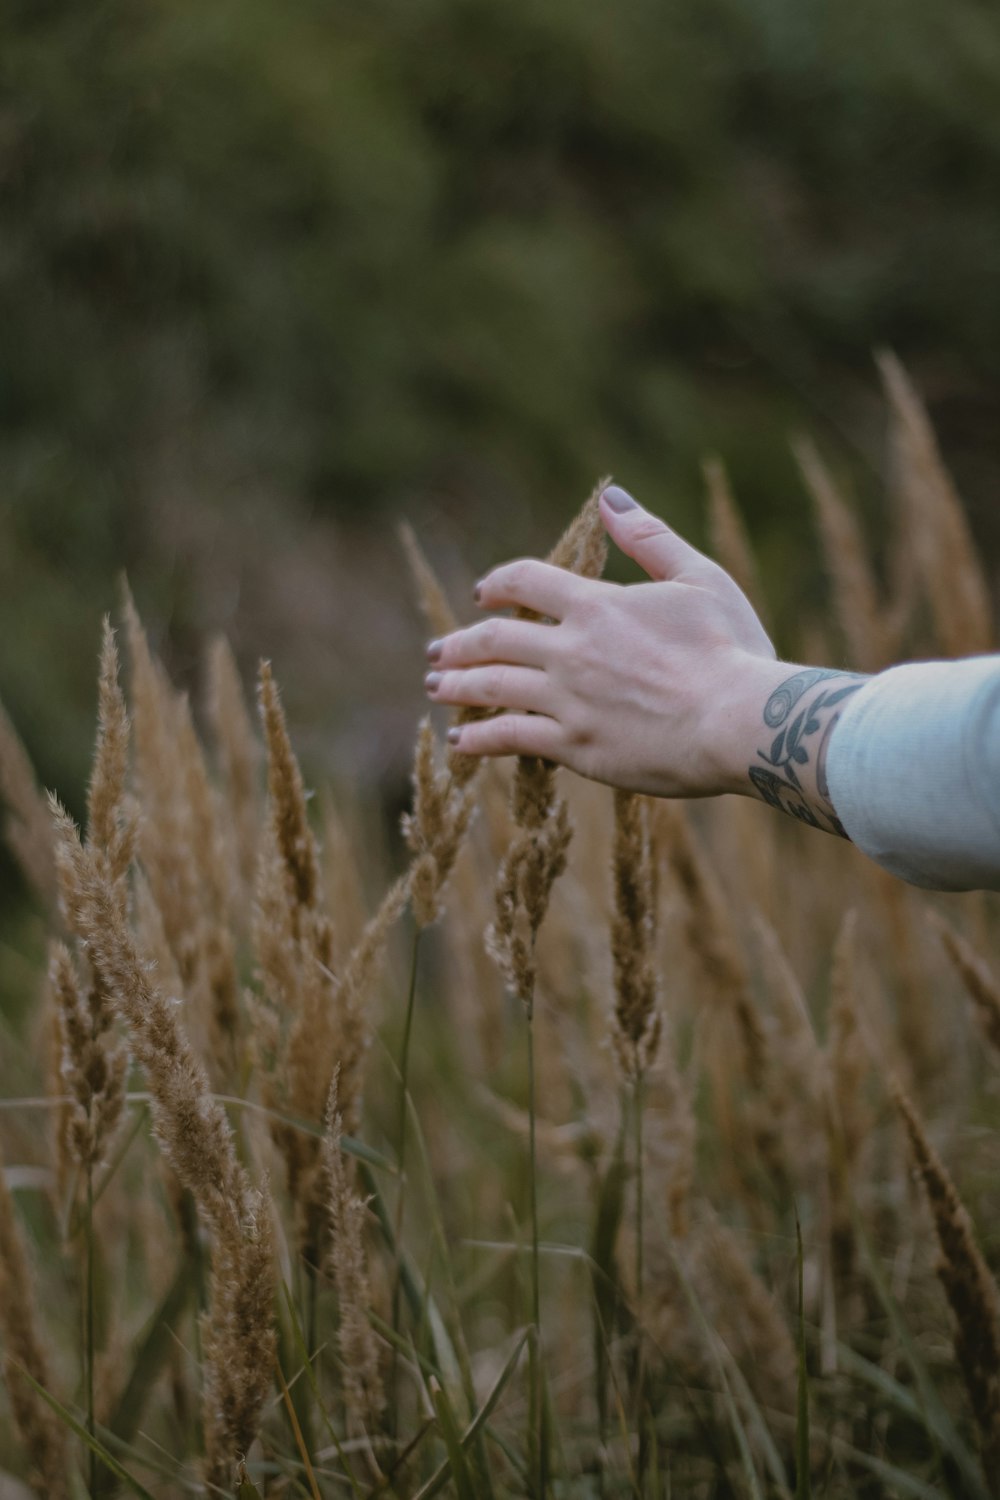 a person's hand reaching for a frisbee in a field